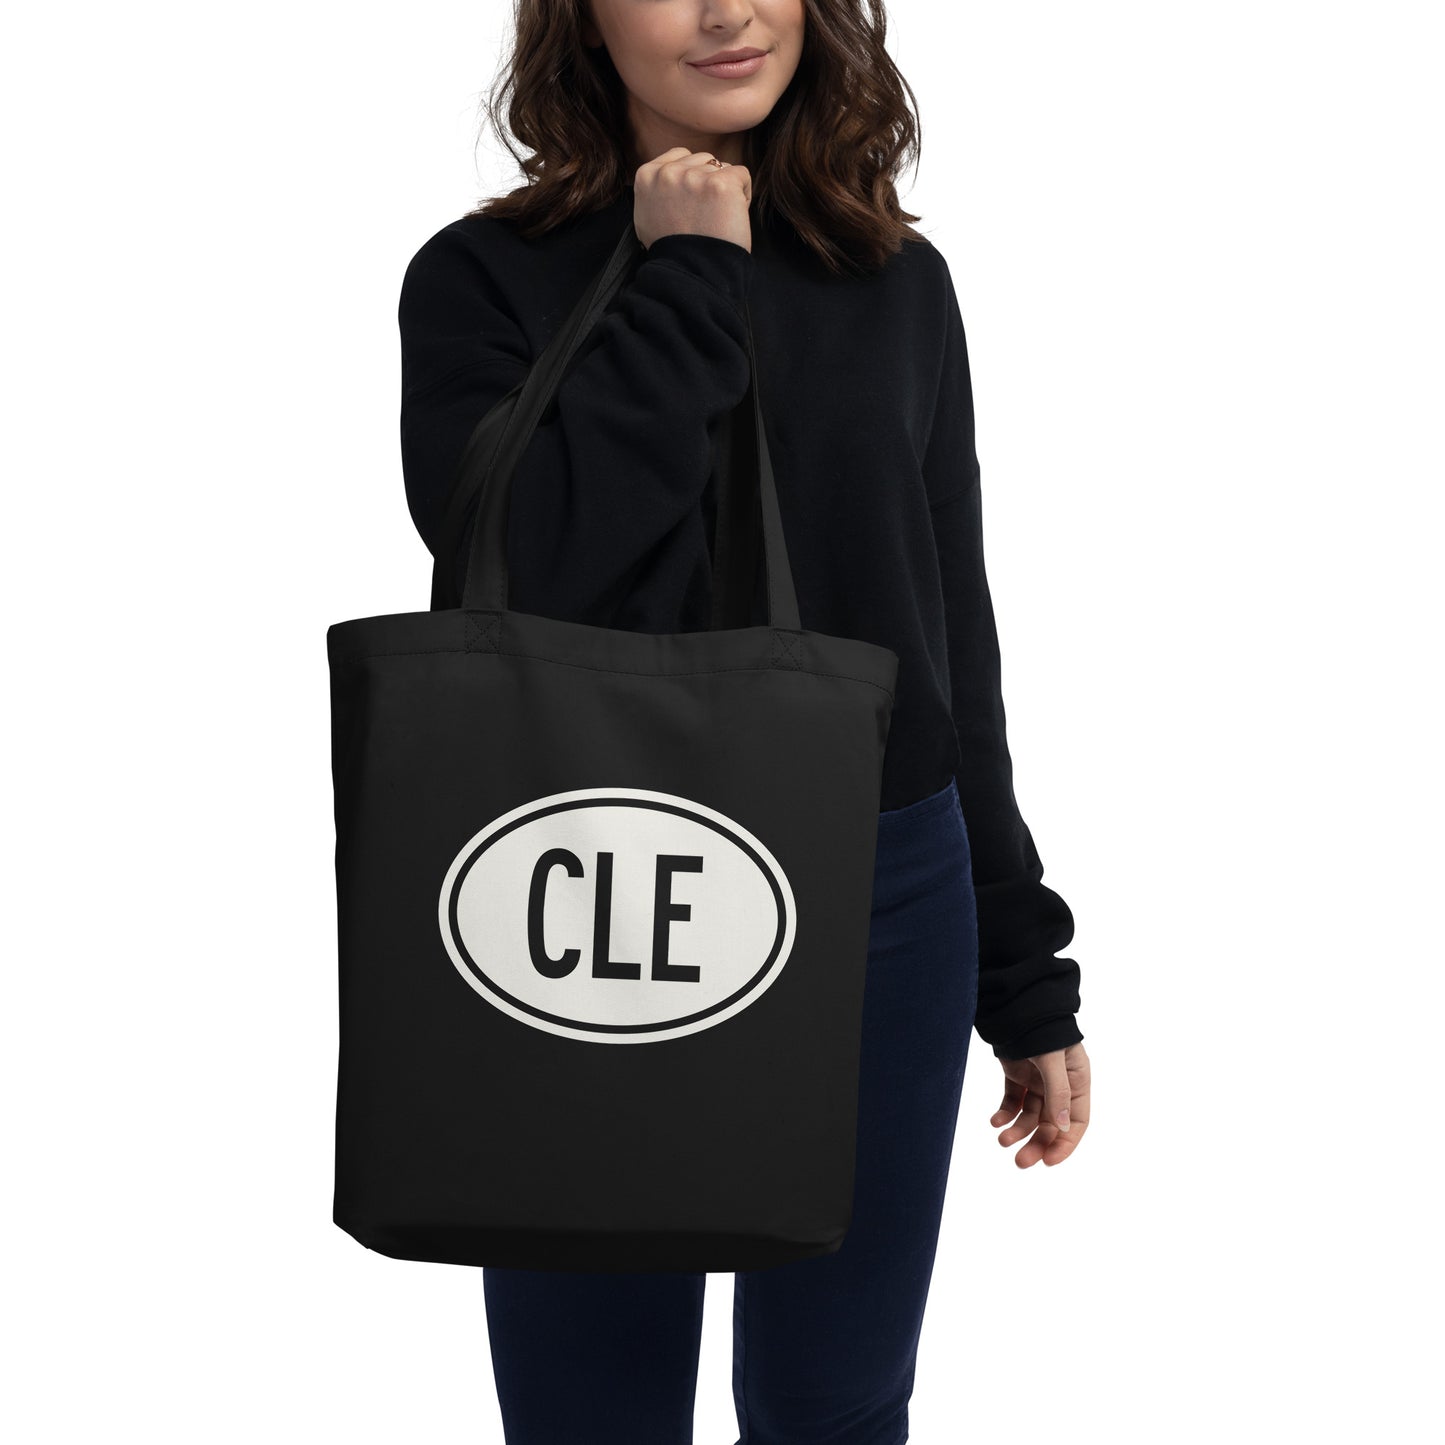 Unique Travel Gift Organic Tote - White Oval • CLE Cleveland • YHM Designs - Image 03